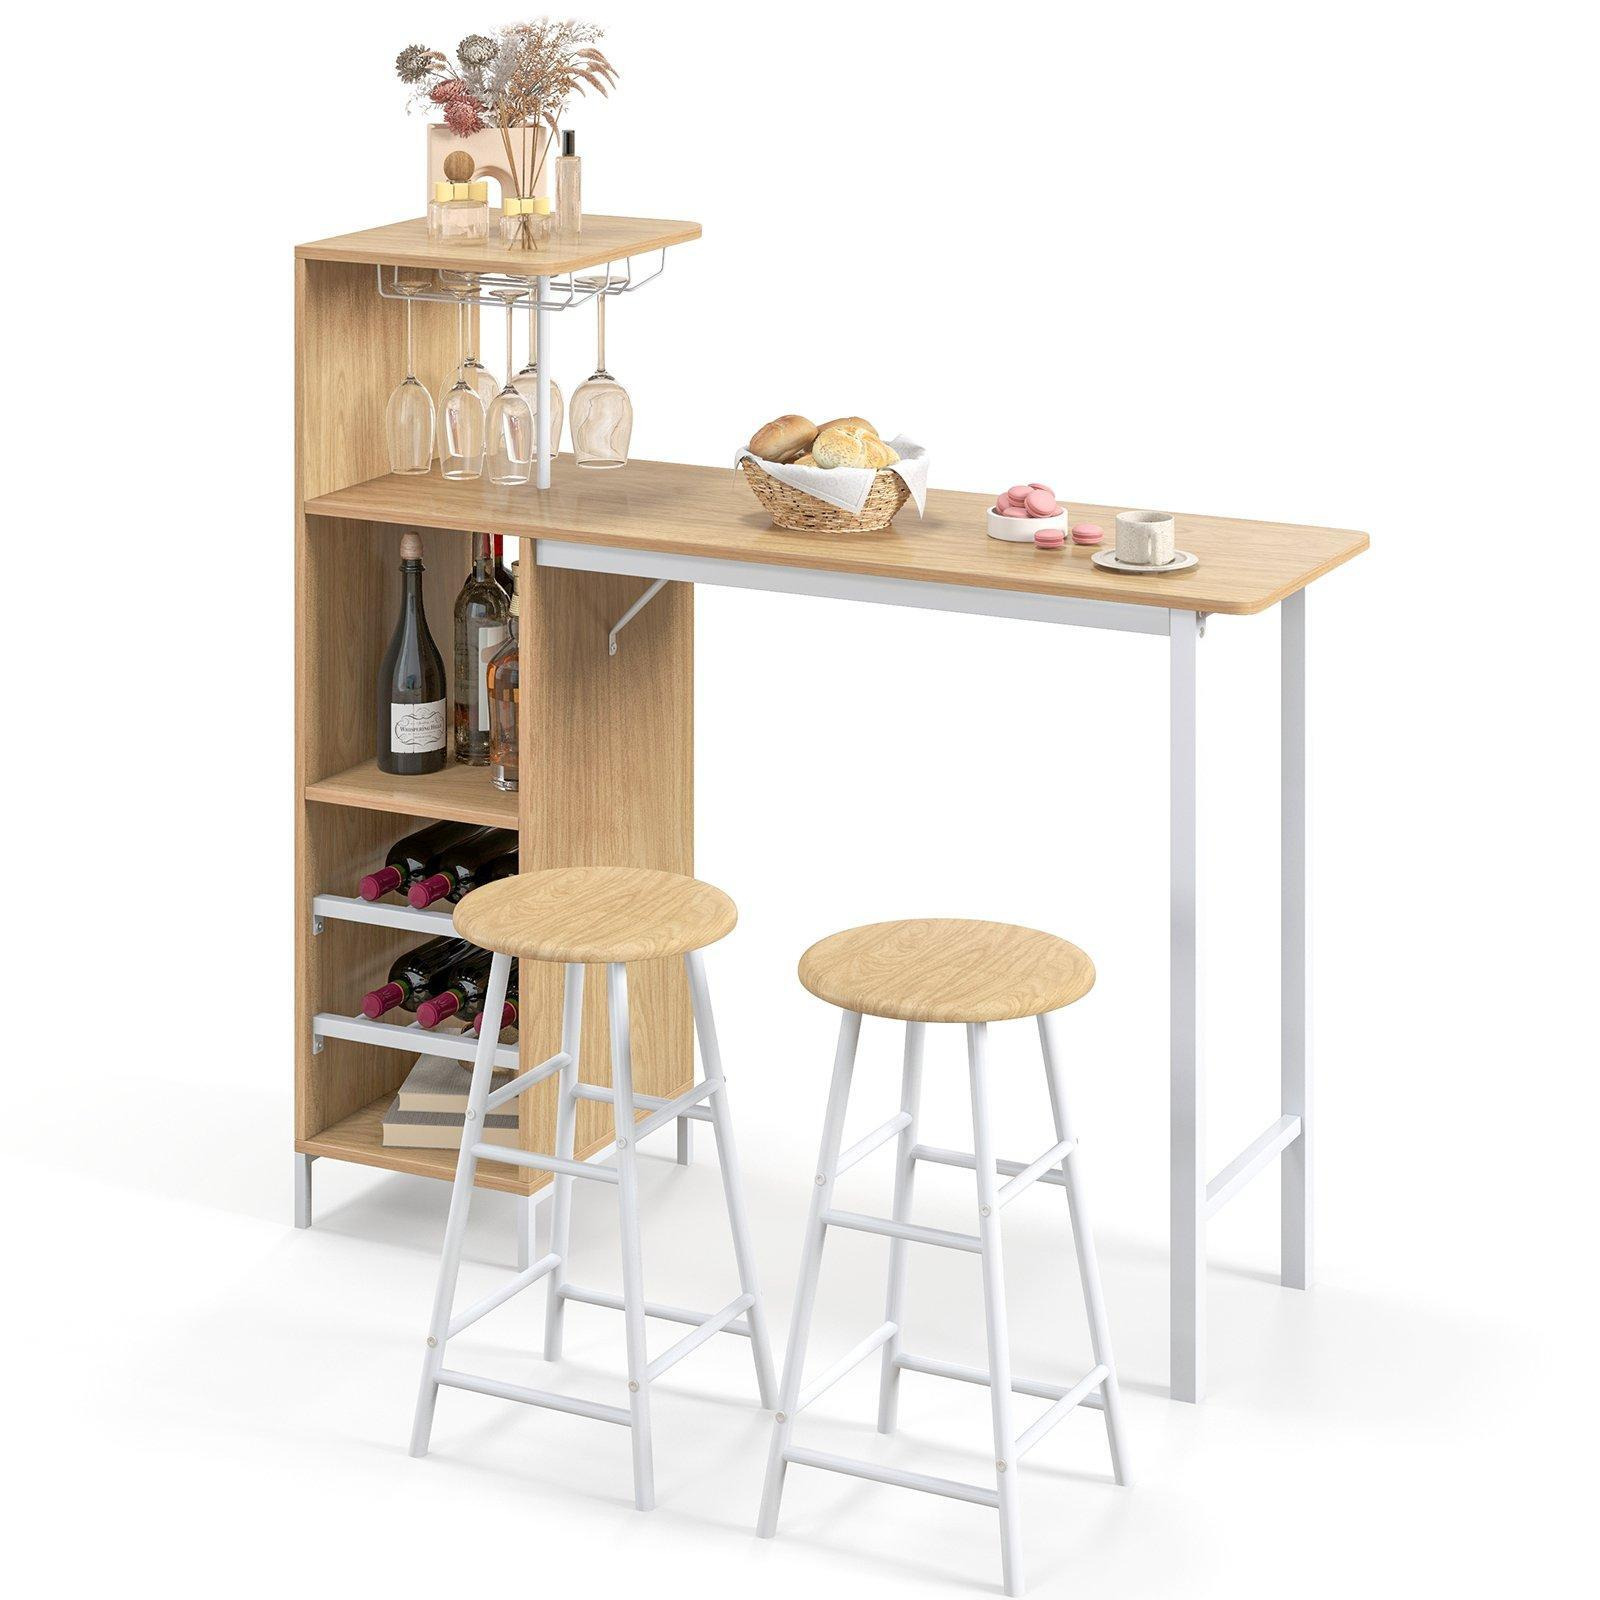 3PCS Bar Table Chair Set Industrial Dining Table Stools w/ Glass Holders & Wine Racks - image 1